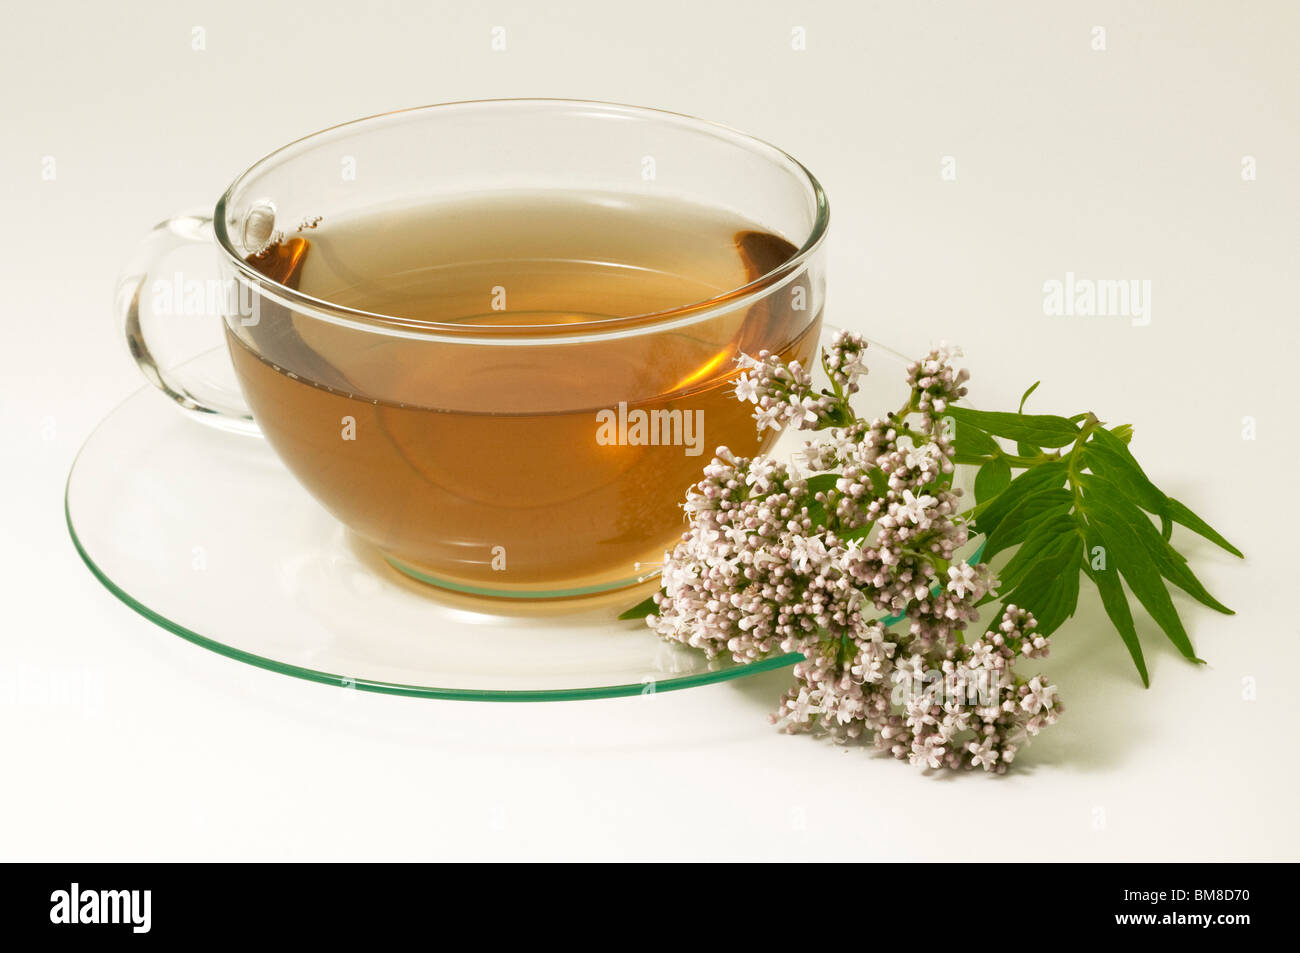 Common Valerian (Valeriana officinalis). A cup of tea with flowers and leaves, studio picture. Stock Photo